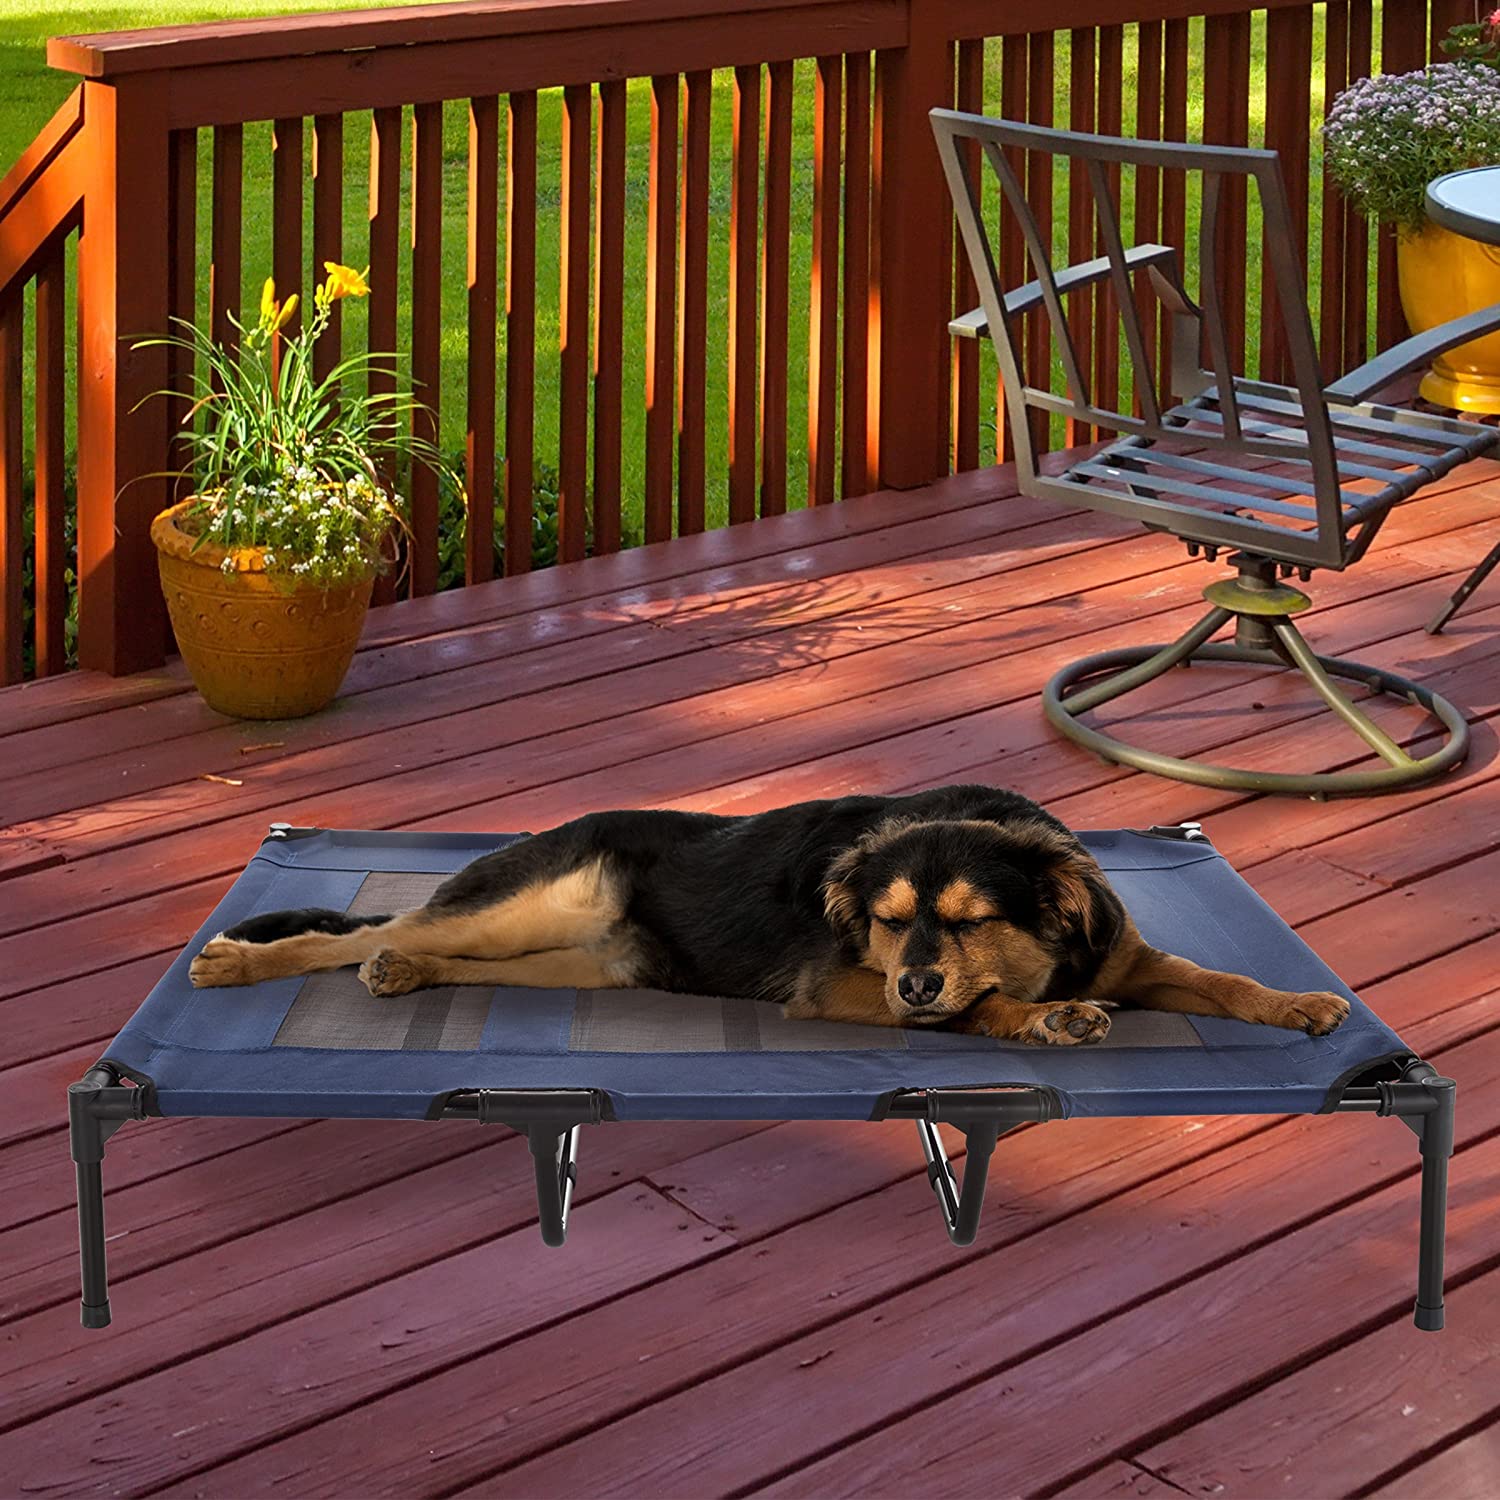 Elevated Portable/Cot-Style Blue XL Pet Bed  #SA1229